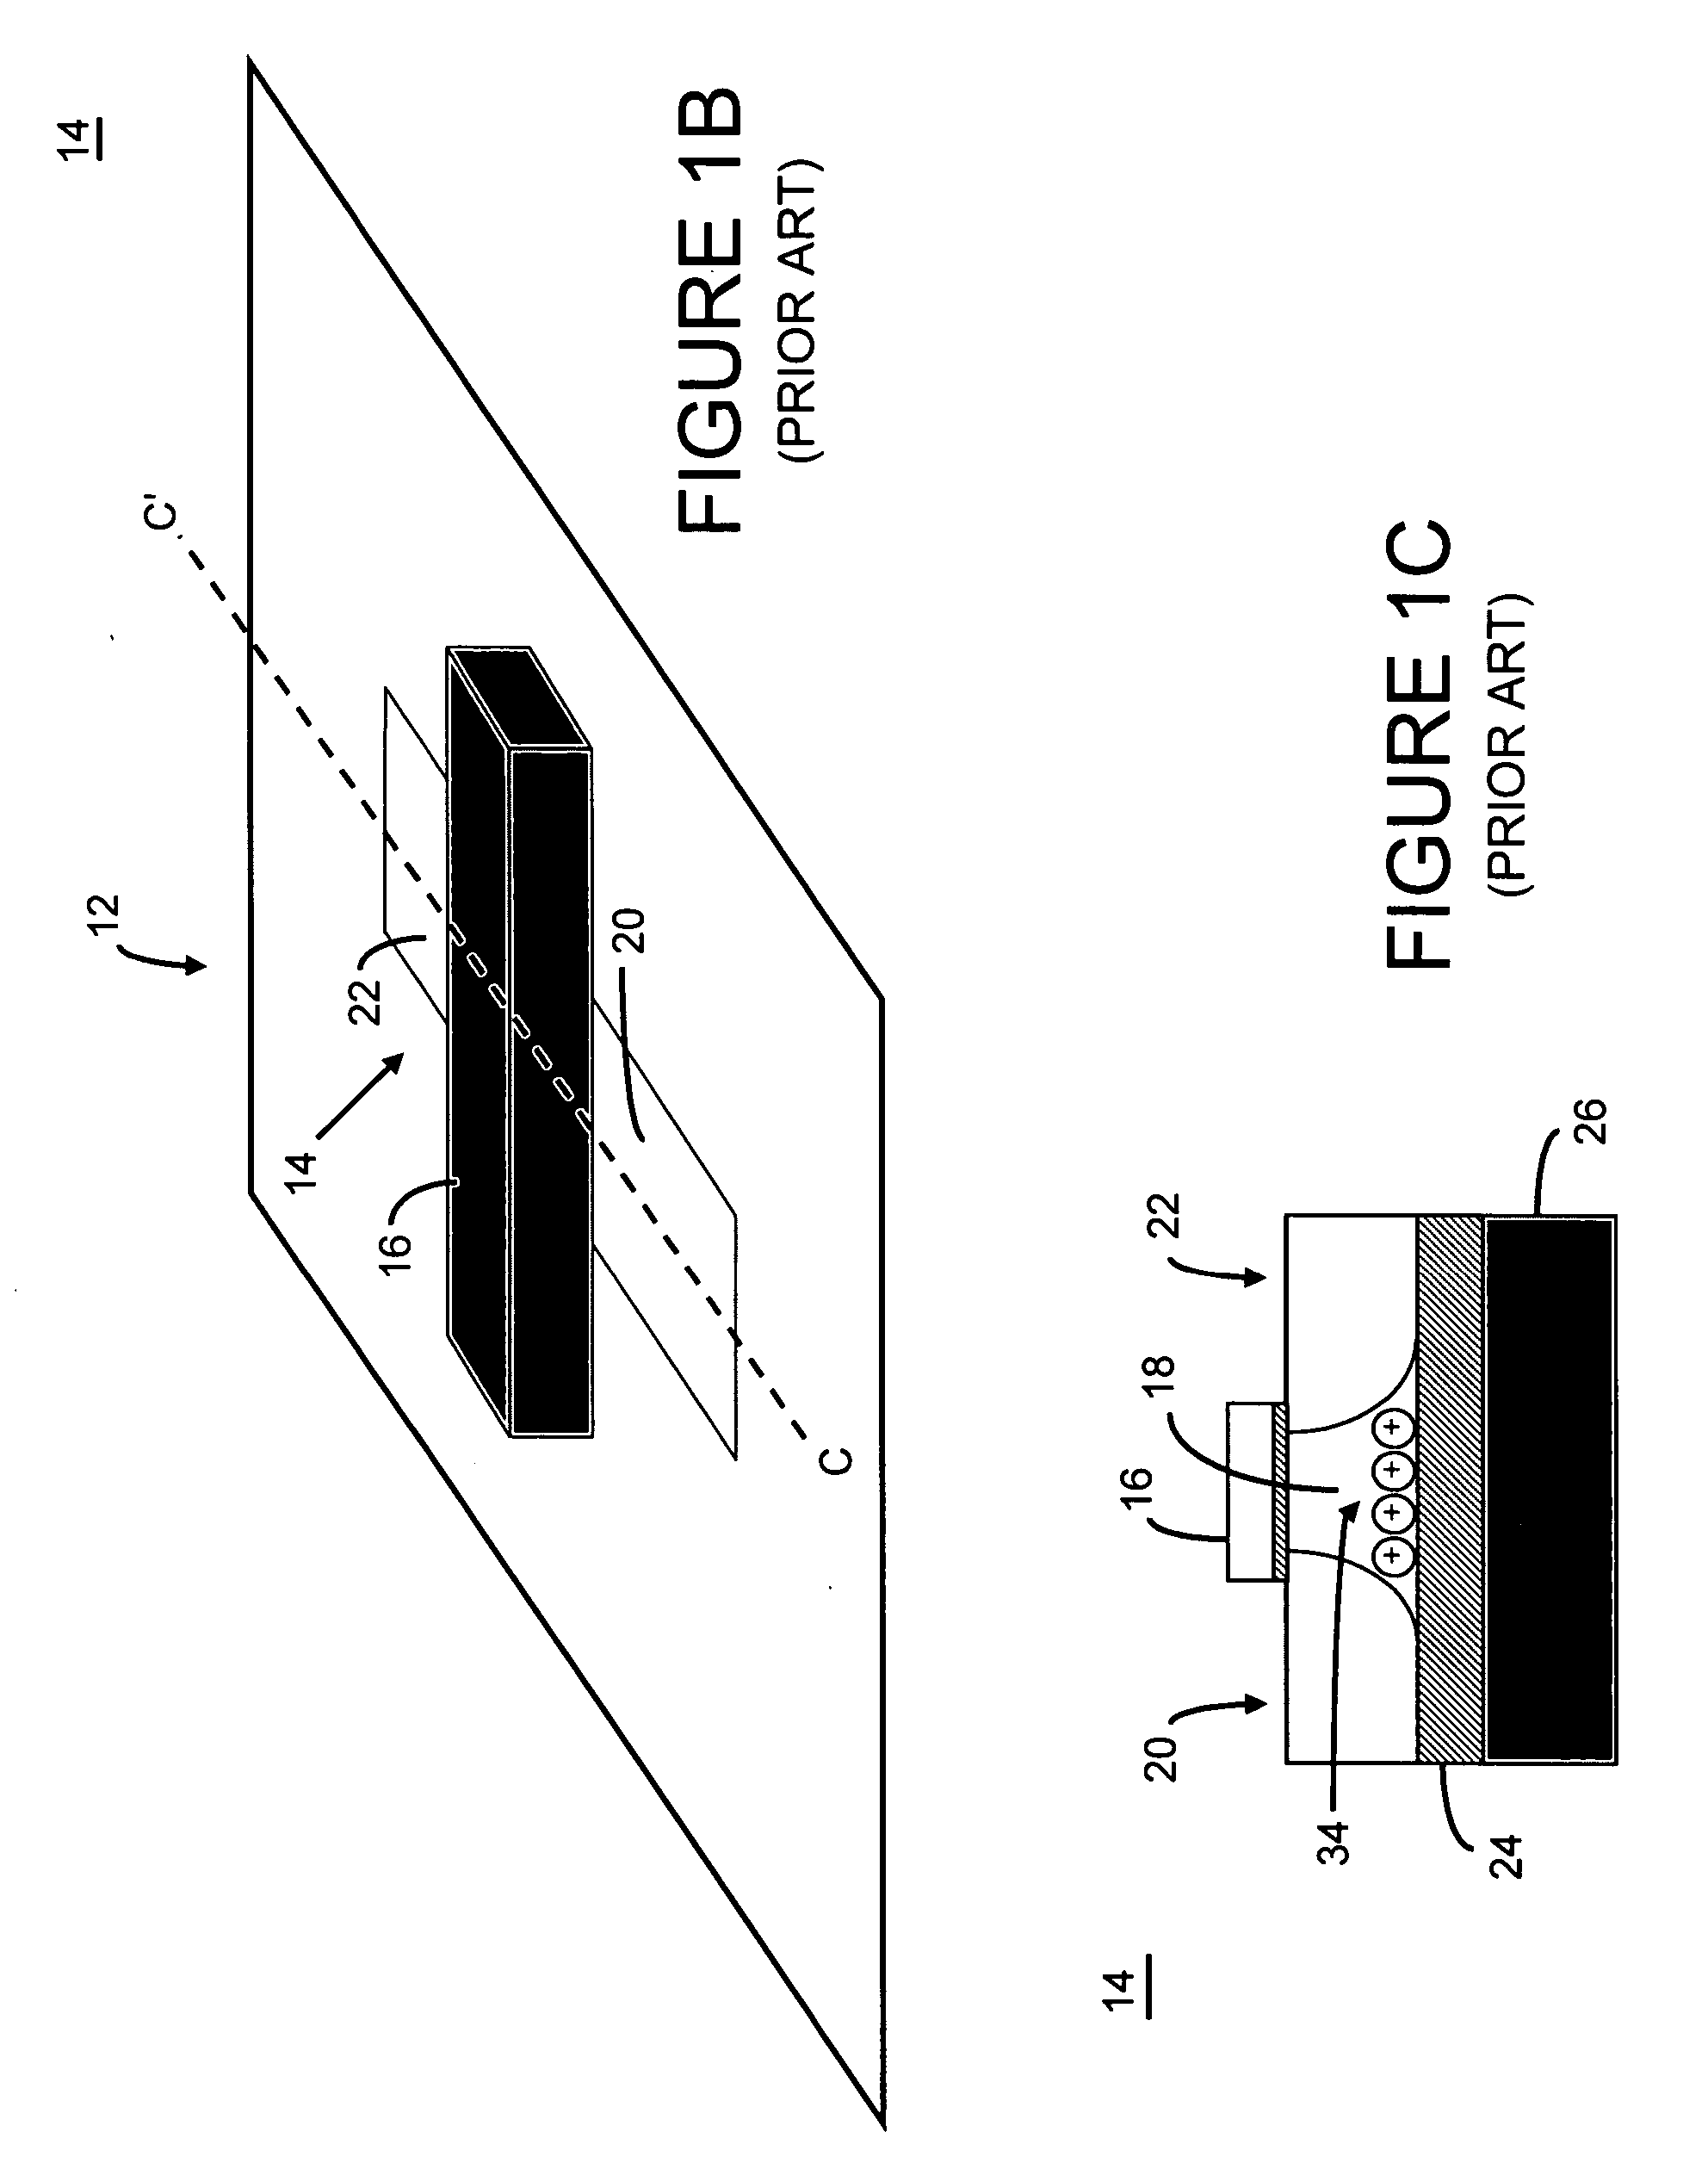 Method and circuitry to generate a reference current for reading a memory cell, and device implementing same